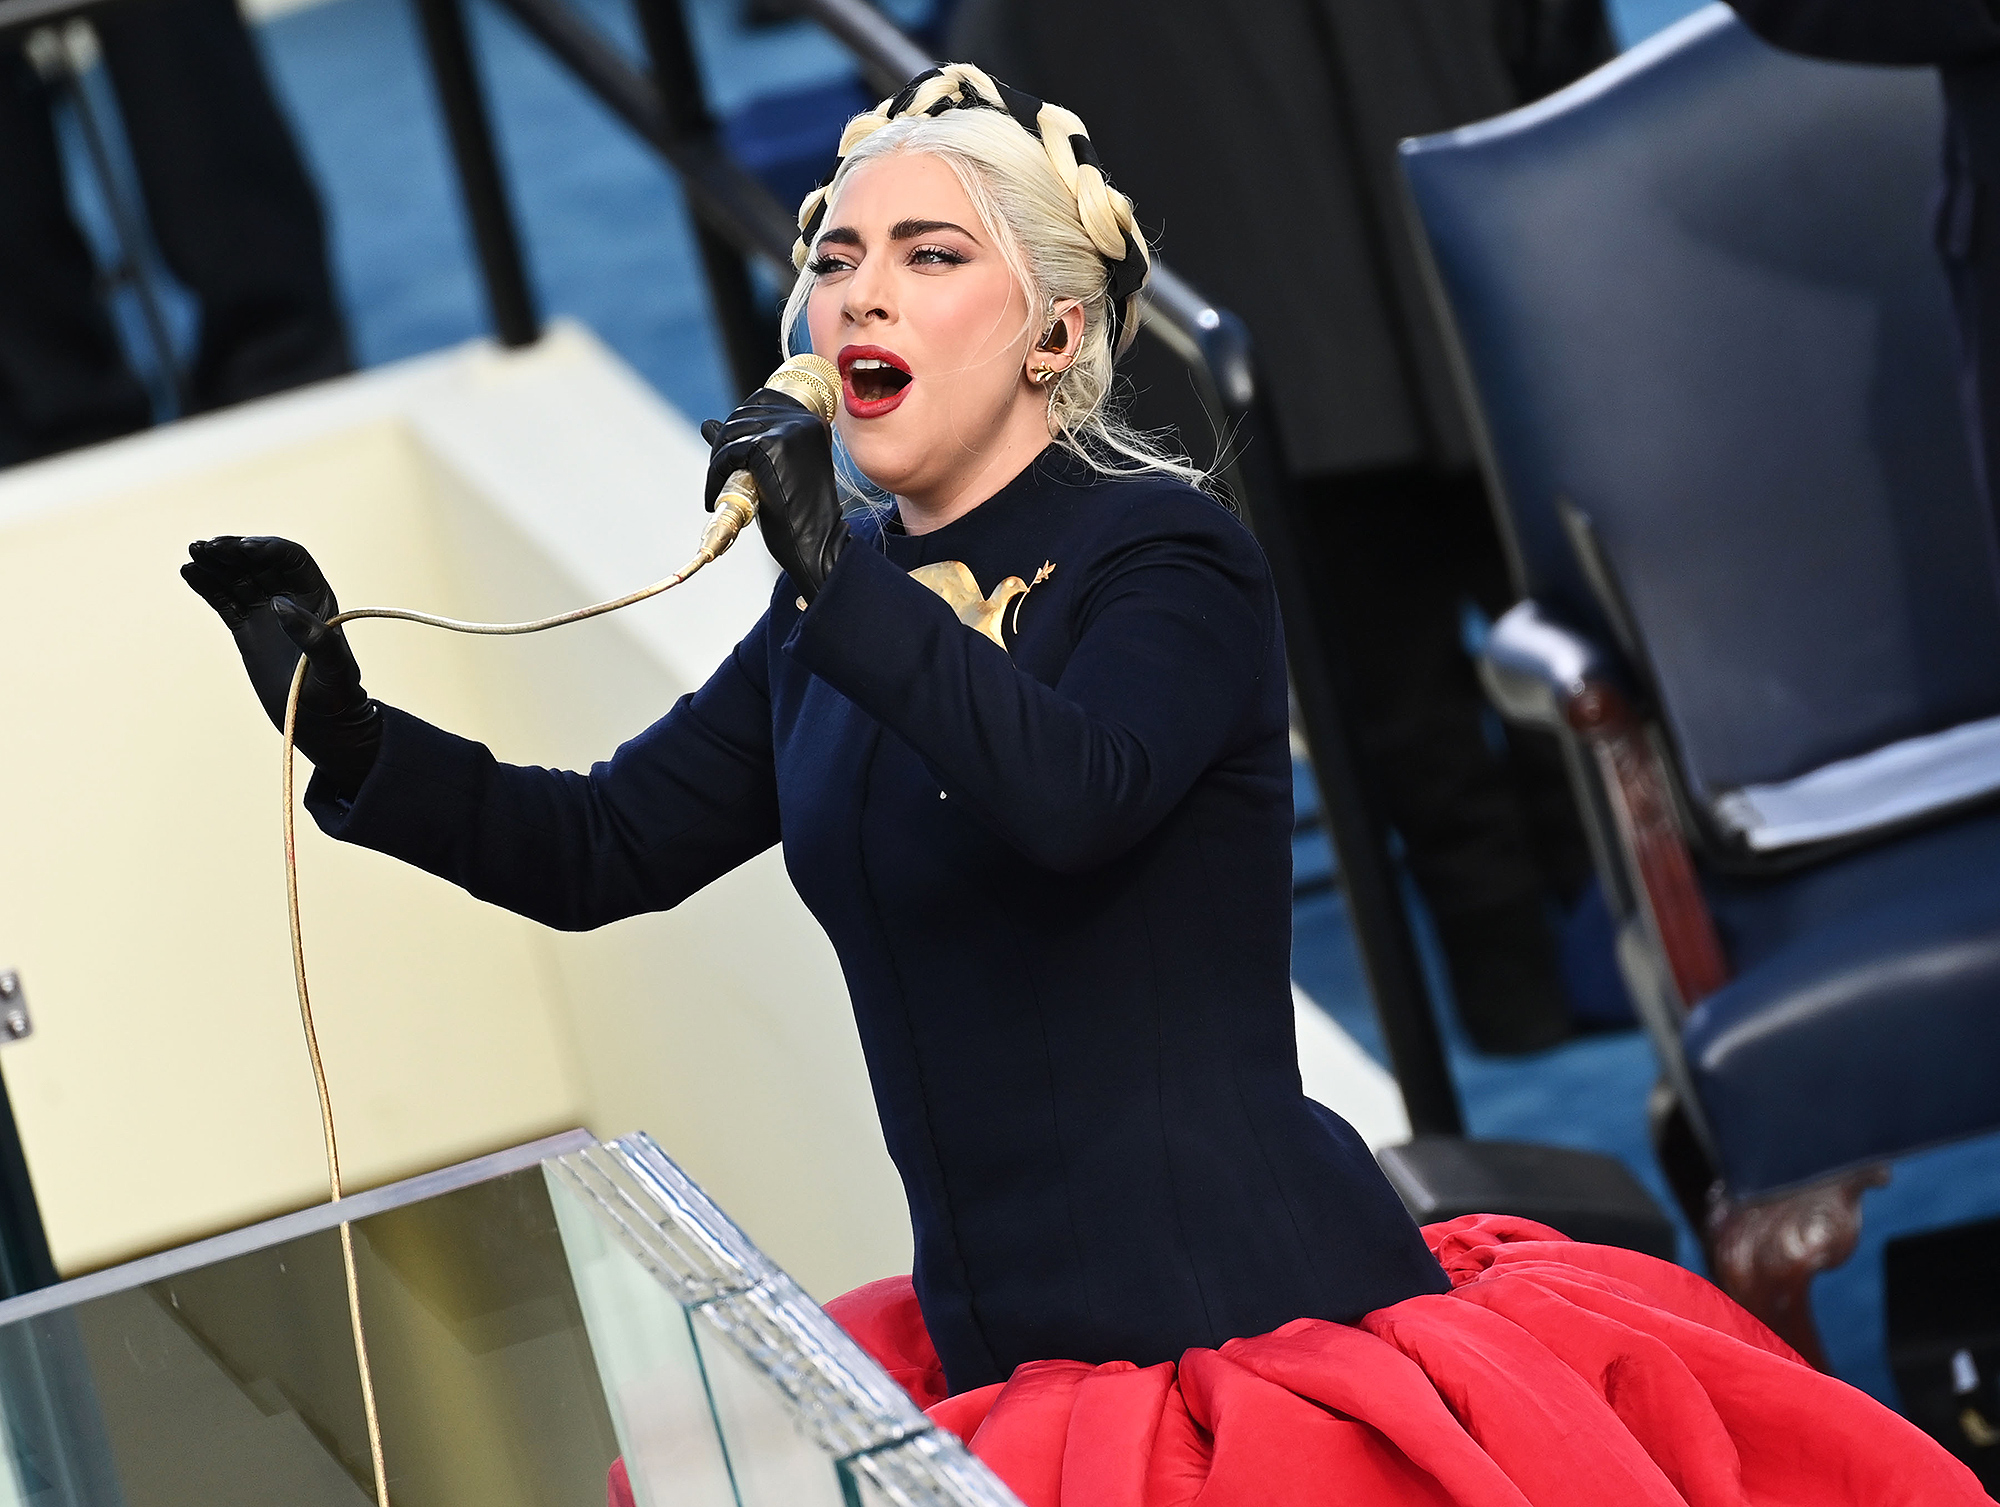 Lady Gaga Pussy Slip Lindsay Lohan - Lady Gaga Performs National Anthem in D.C. on Inauguration Day